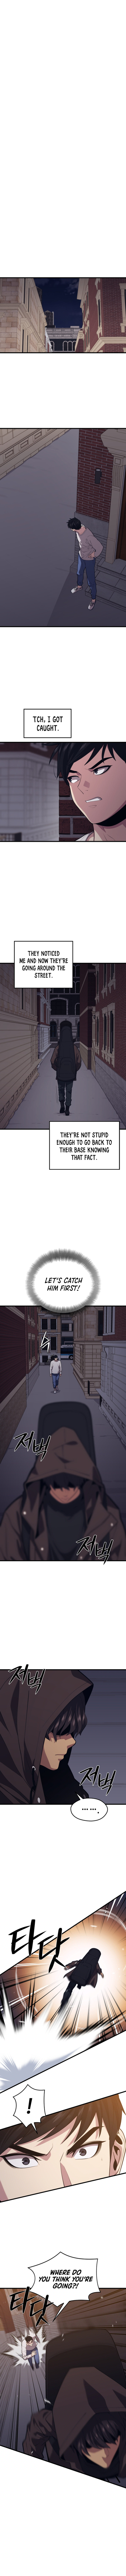 Seoul Station Necromancer - Chapter 45 Page 5